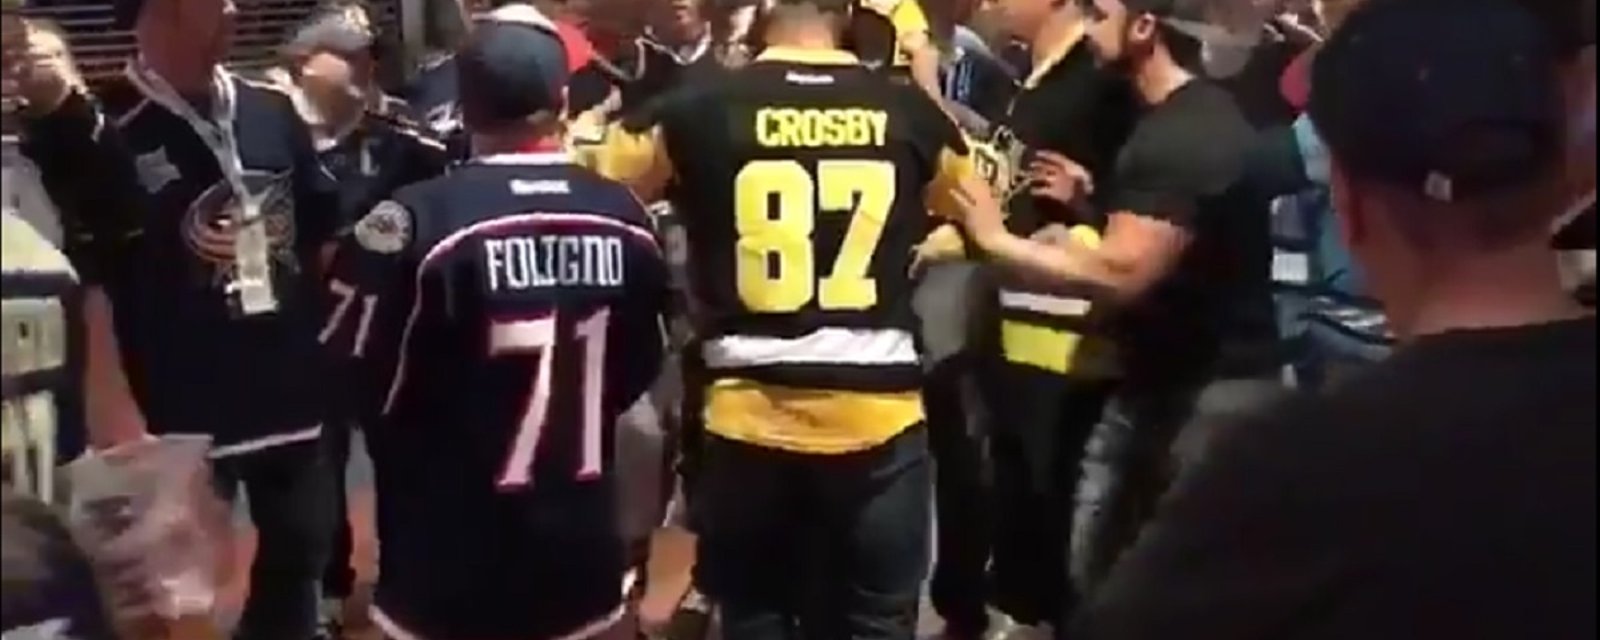 Crosby fan caught sucker punching another fan at the game.